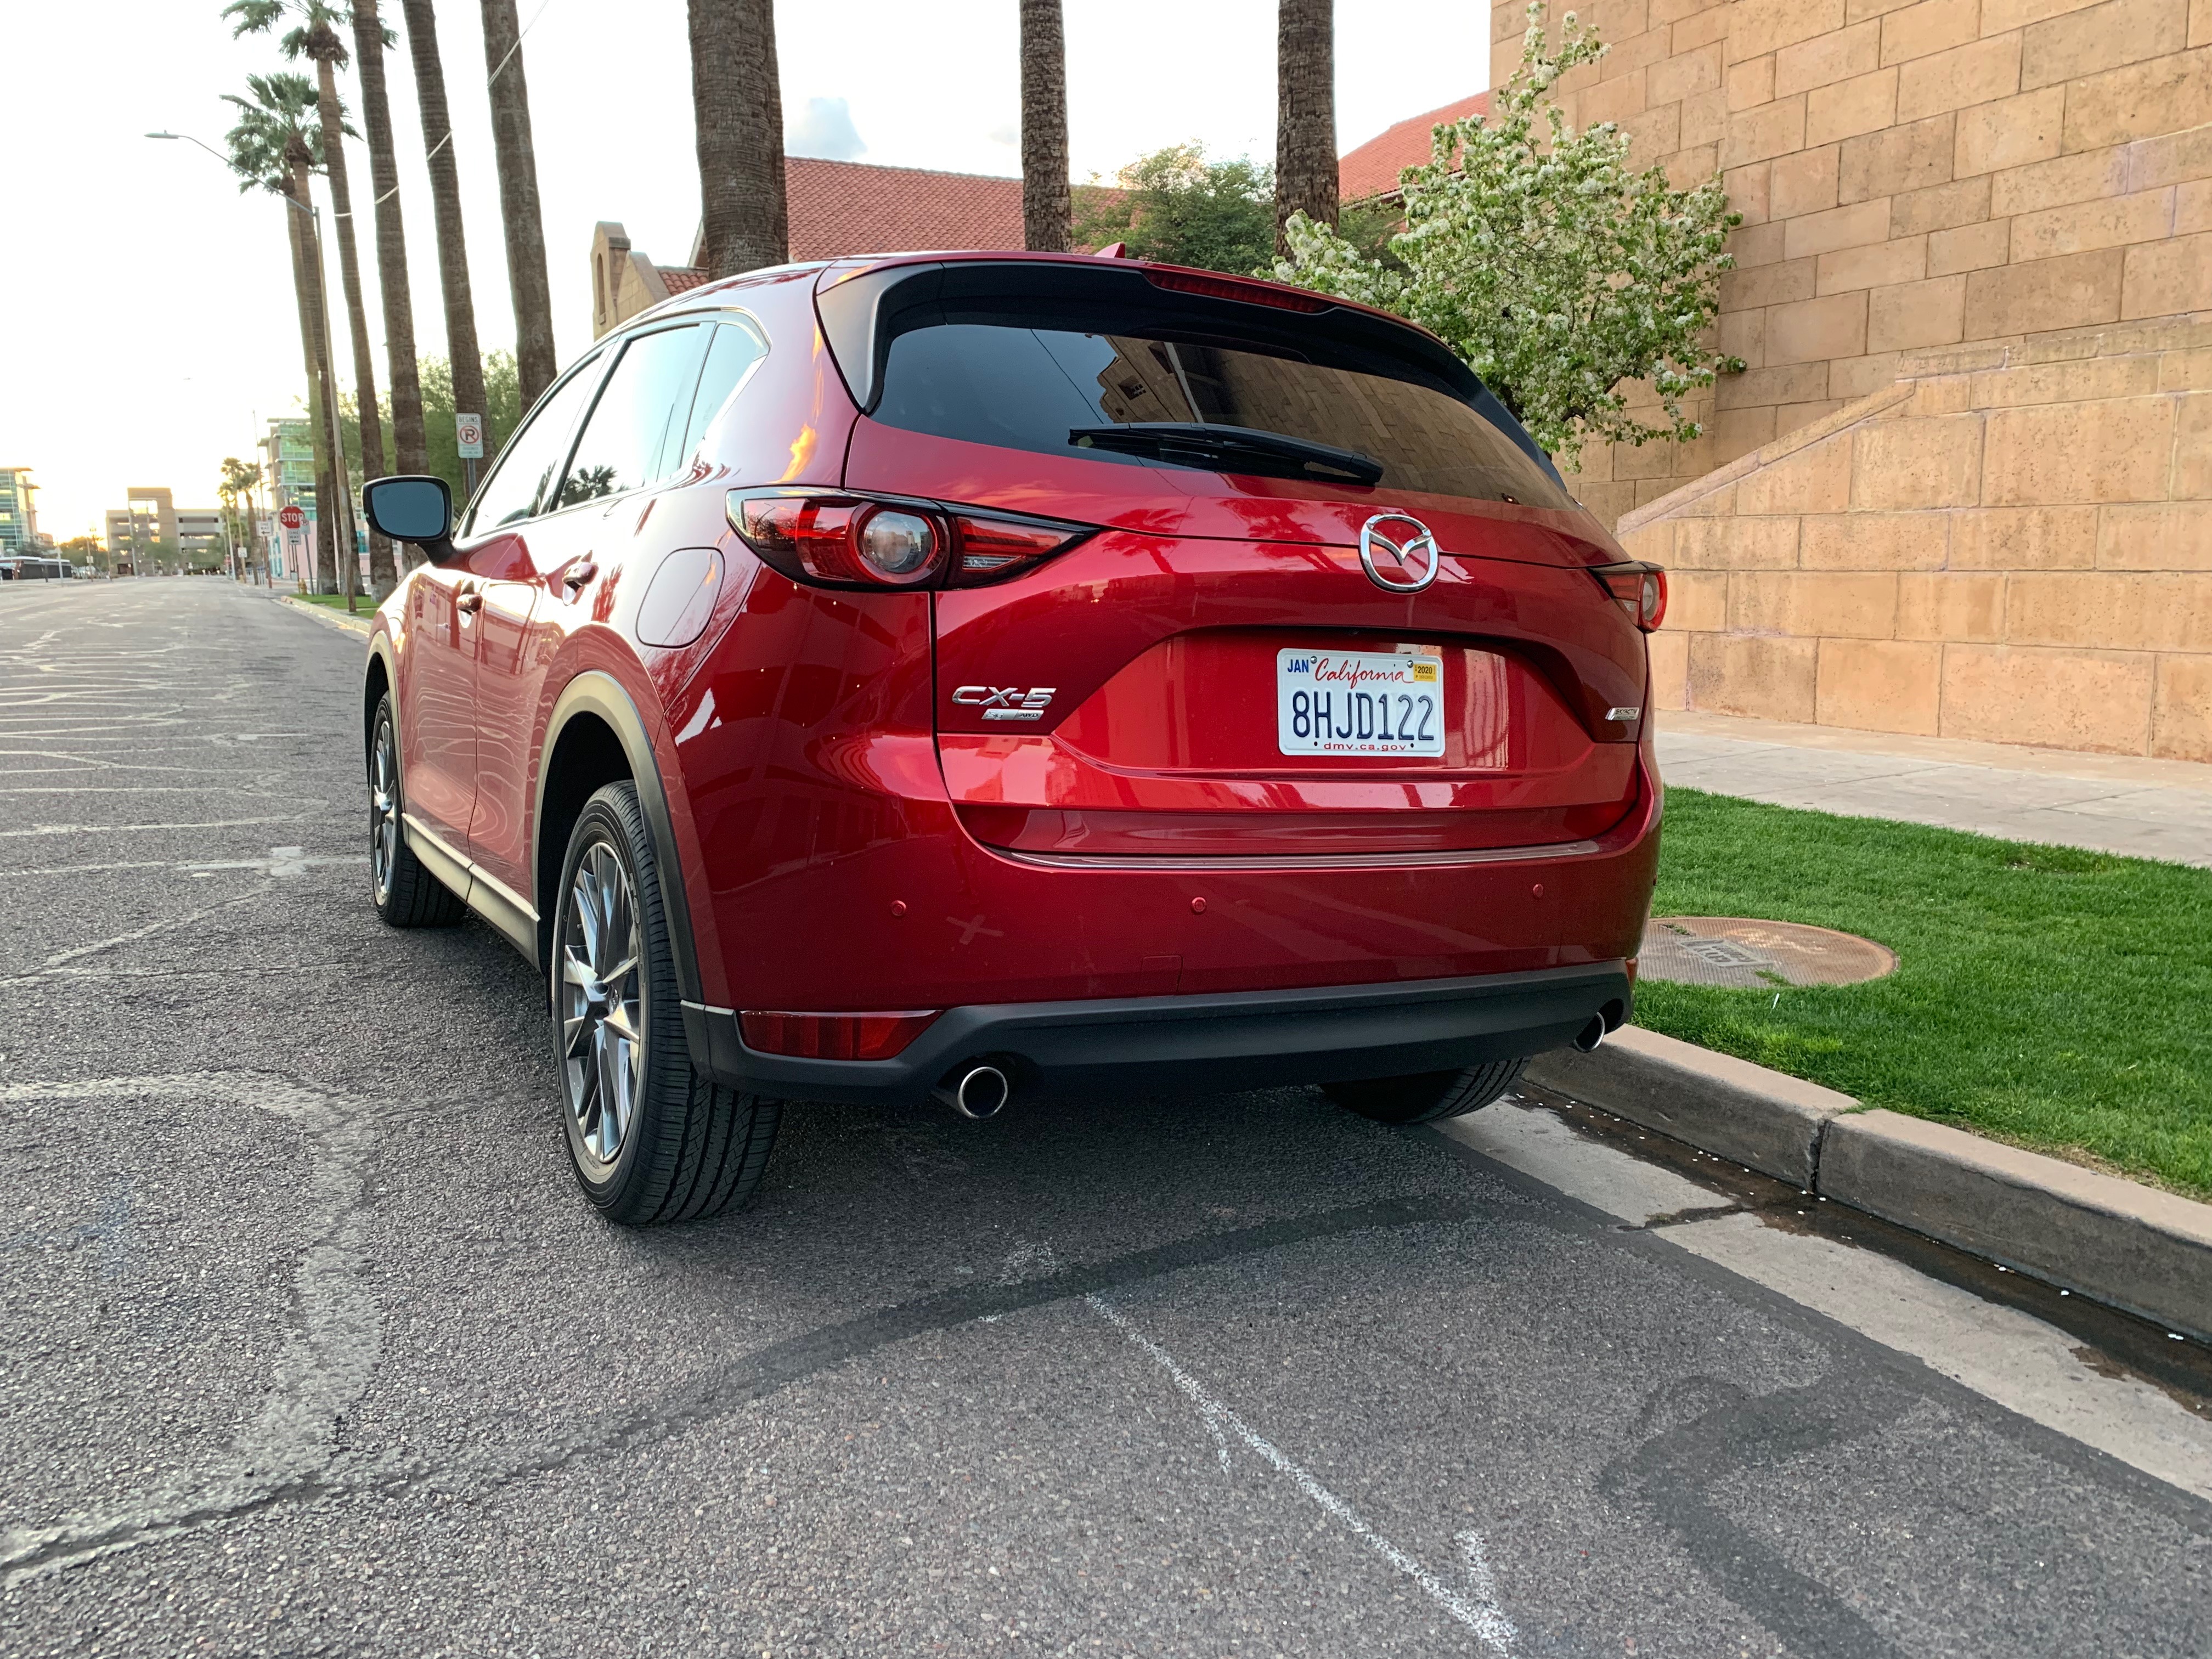 Mazda CX-5, Mazda CX-5 continues to punch above its weight in compact SUV class, ClassicCars.com Journal